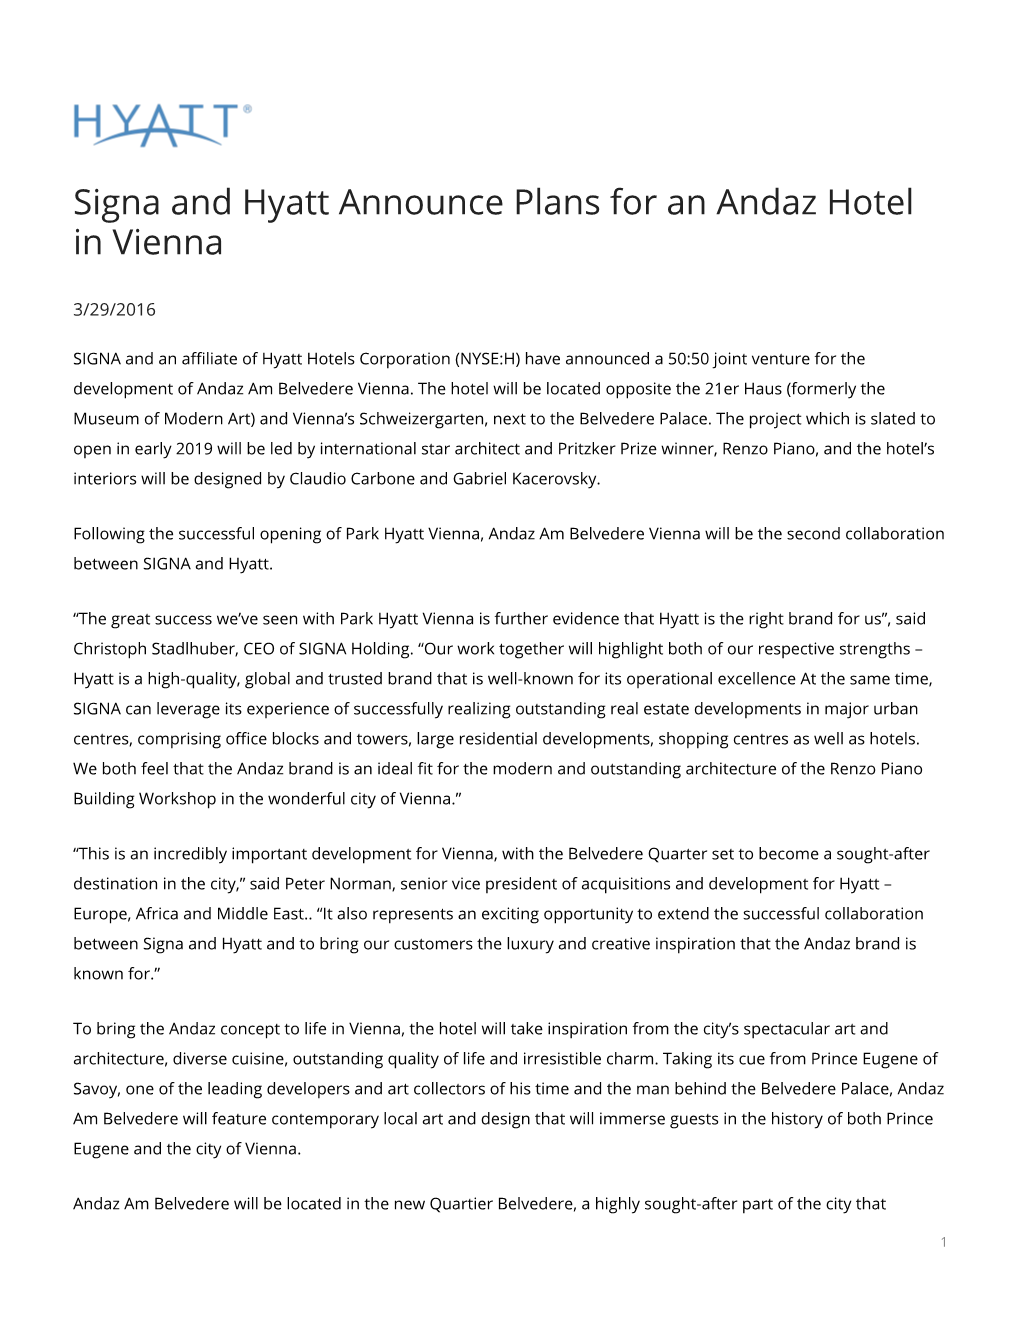 Signa and Hyatt Announce Plans for an Andaz Hotel in Vienna